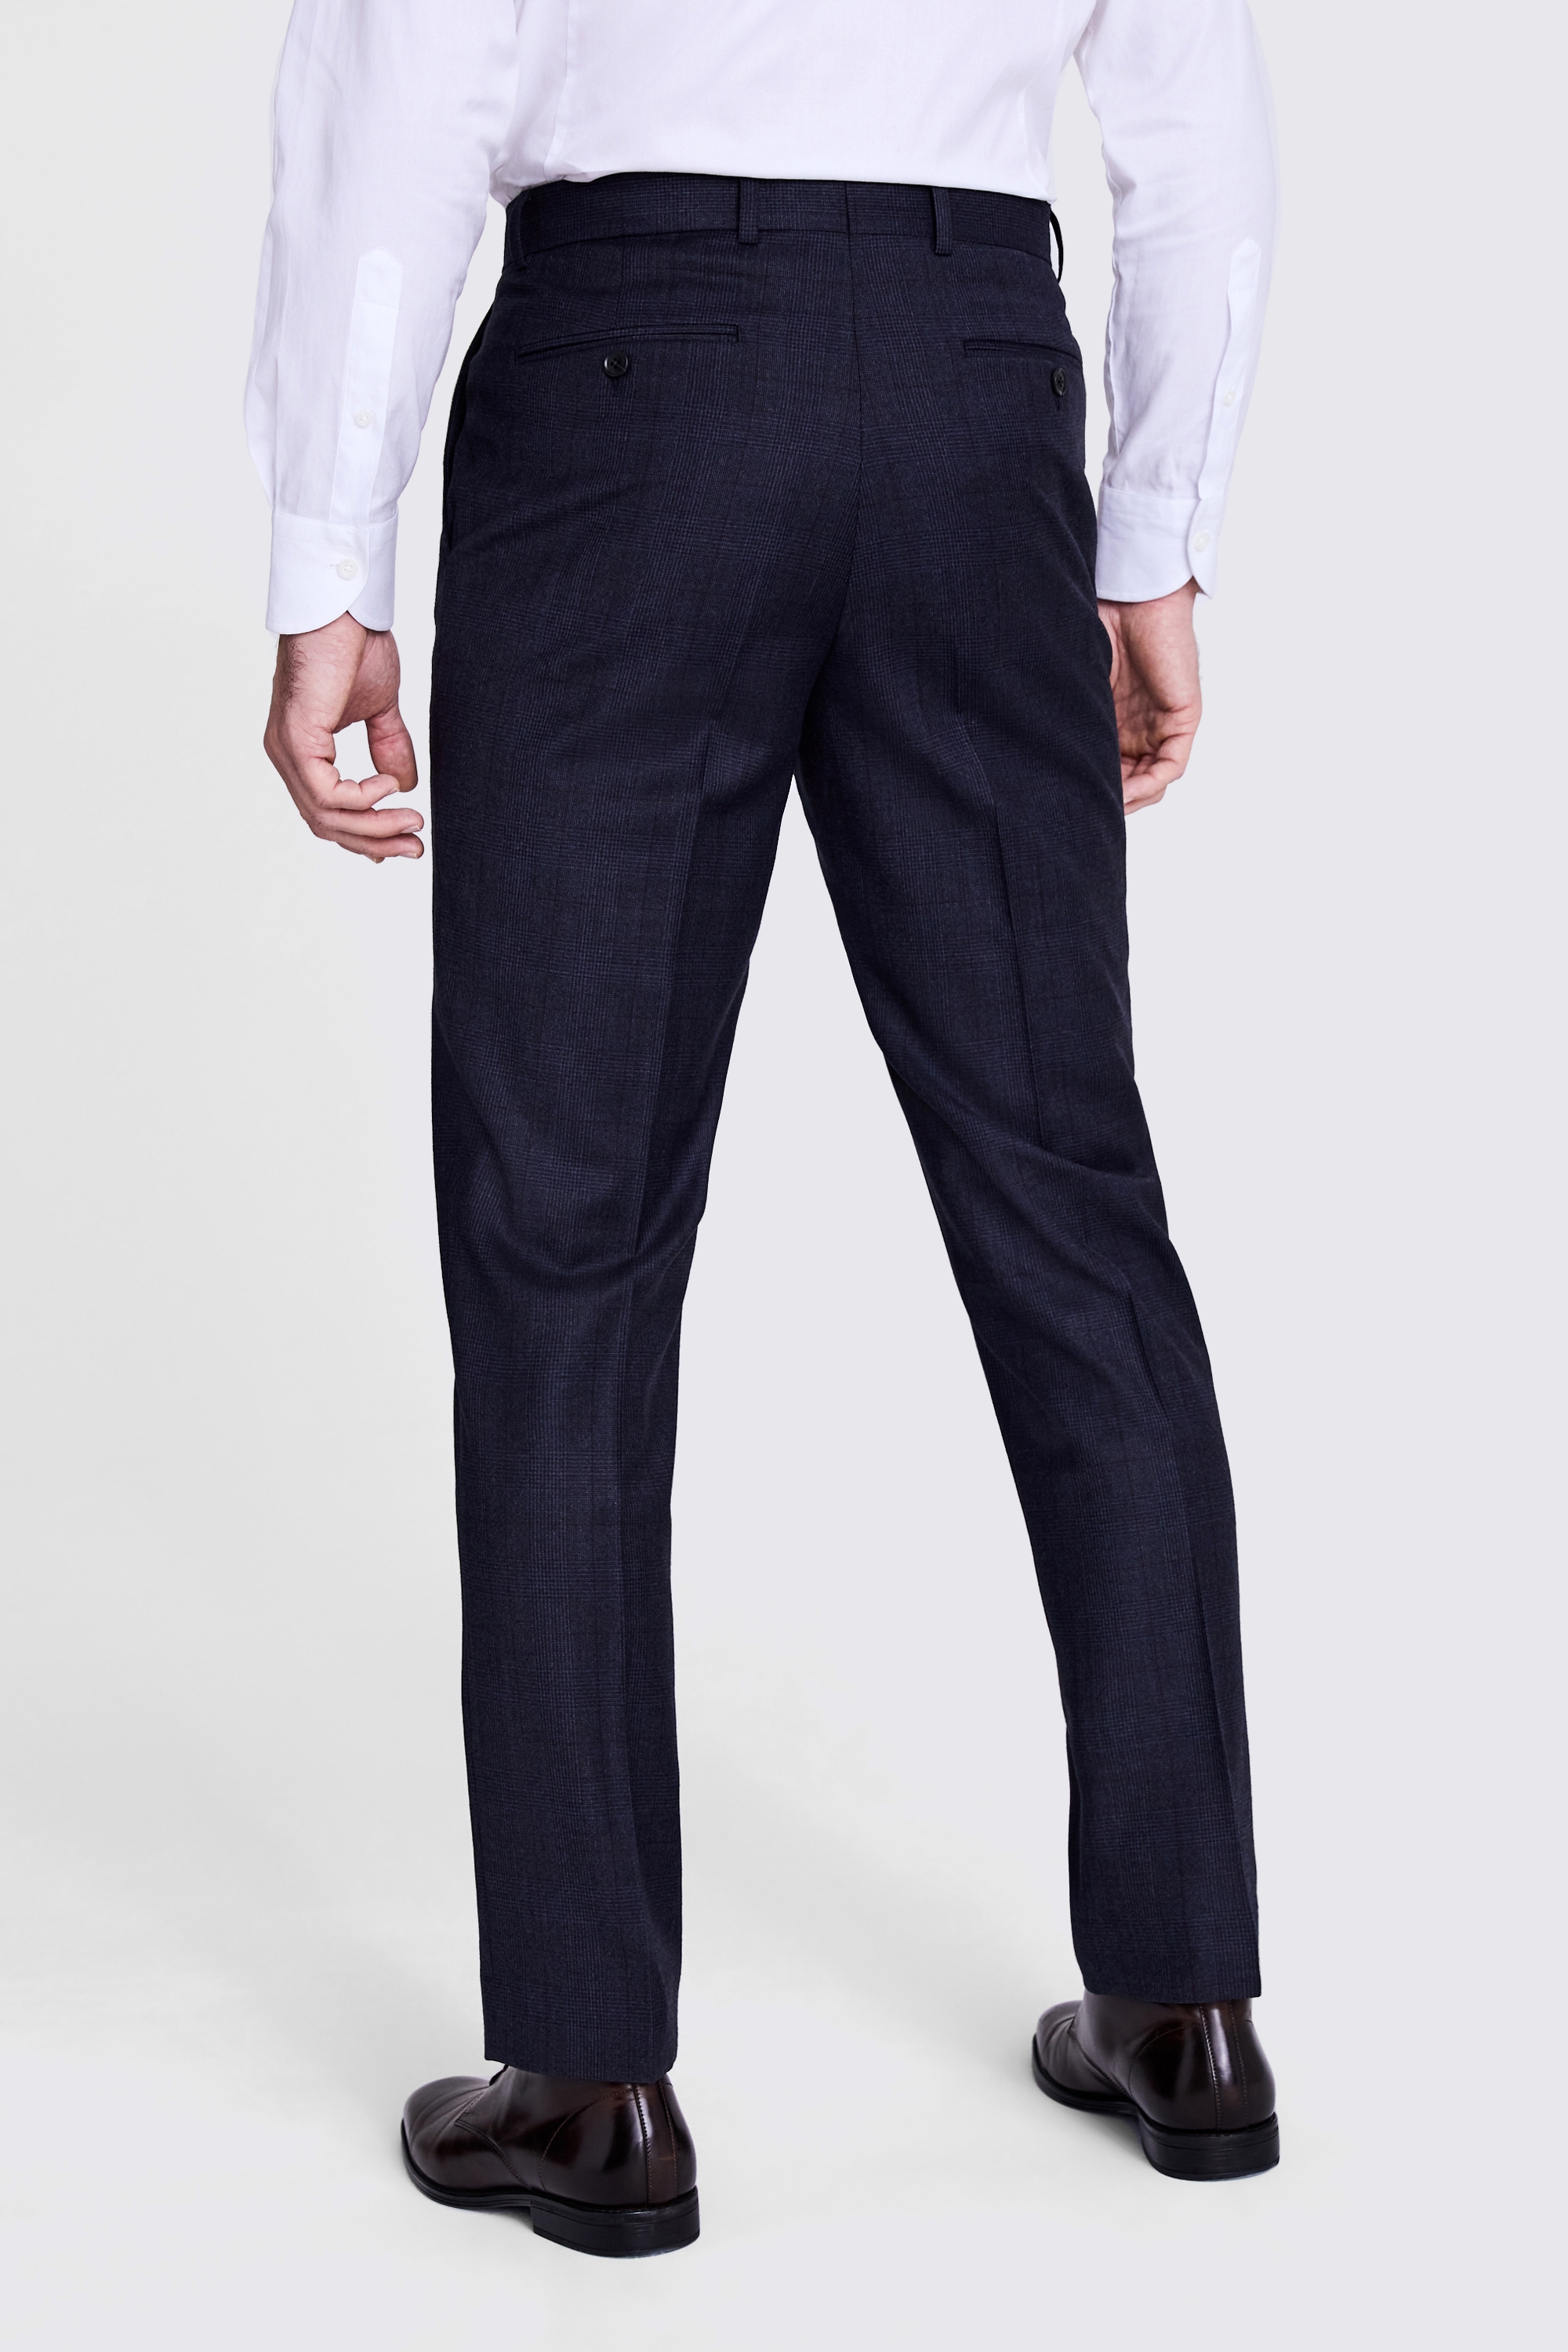 Regular Fit Navy Check Performance Trousers | Buy Online at Moss